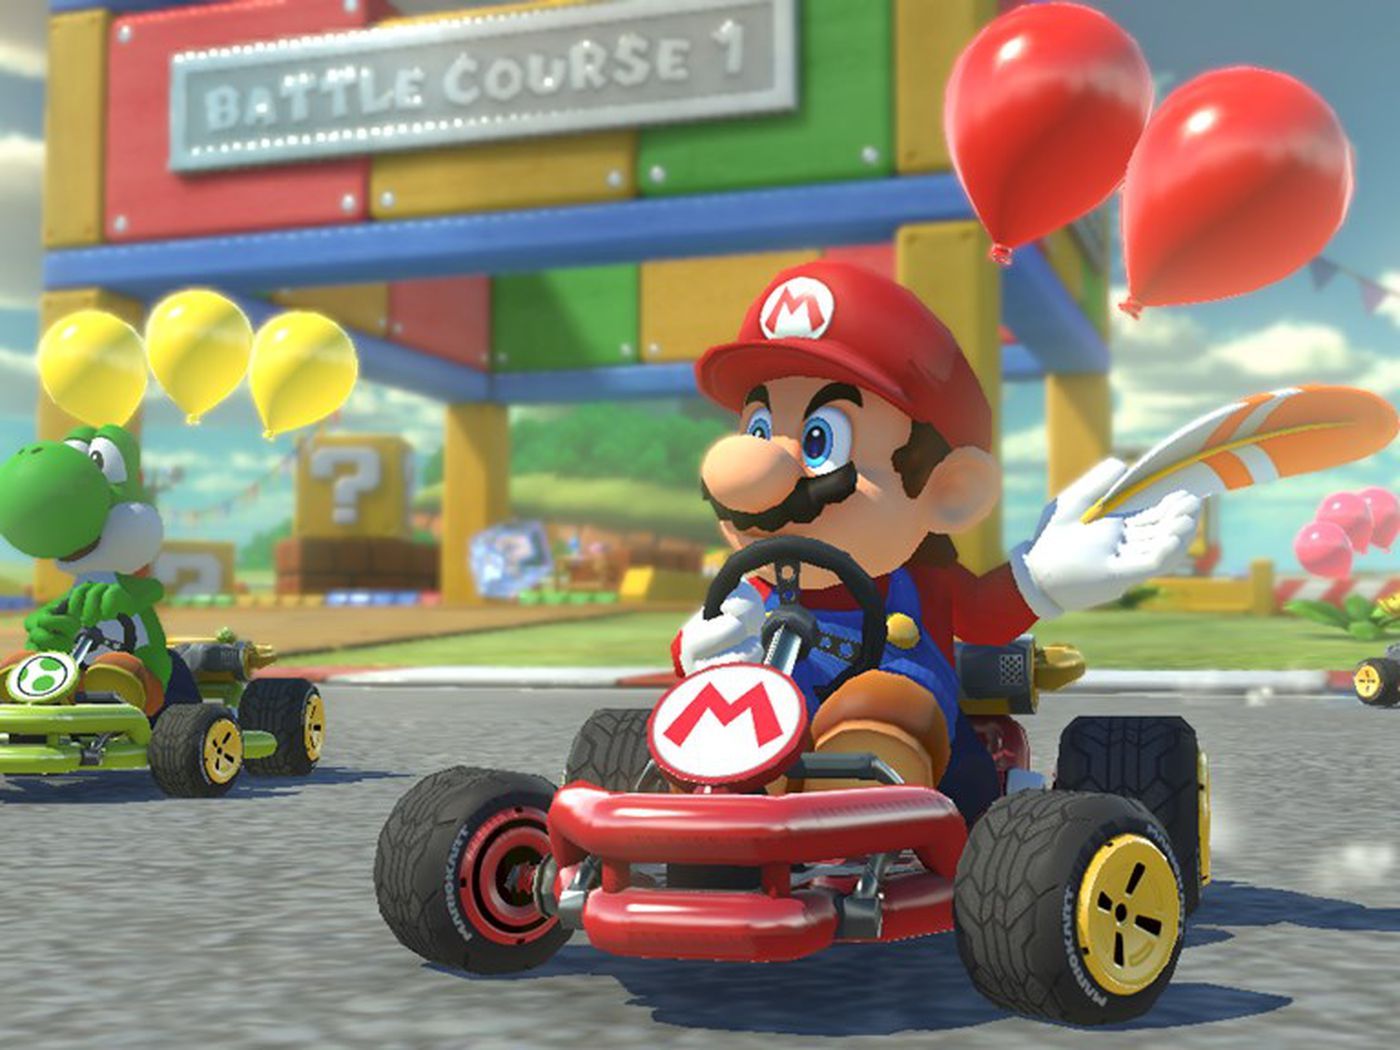 The 7 best things about Mario Kart 8 Deluxe